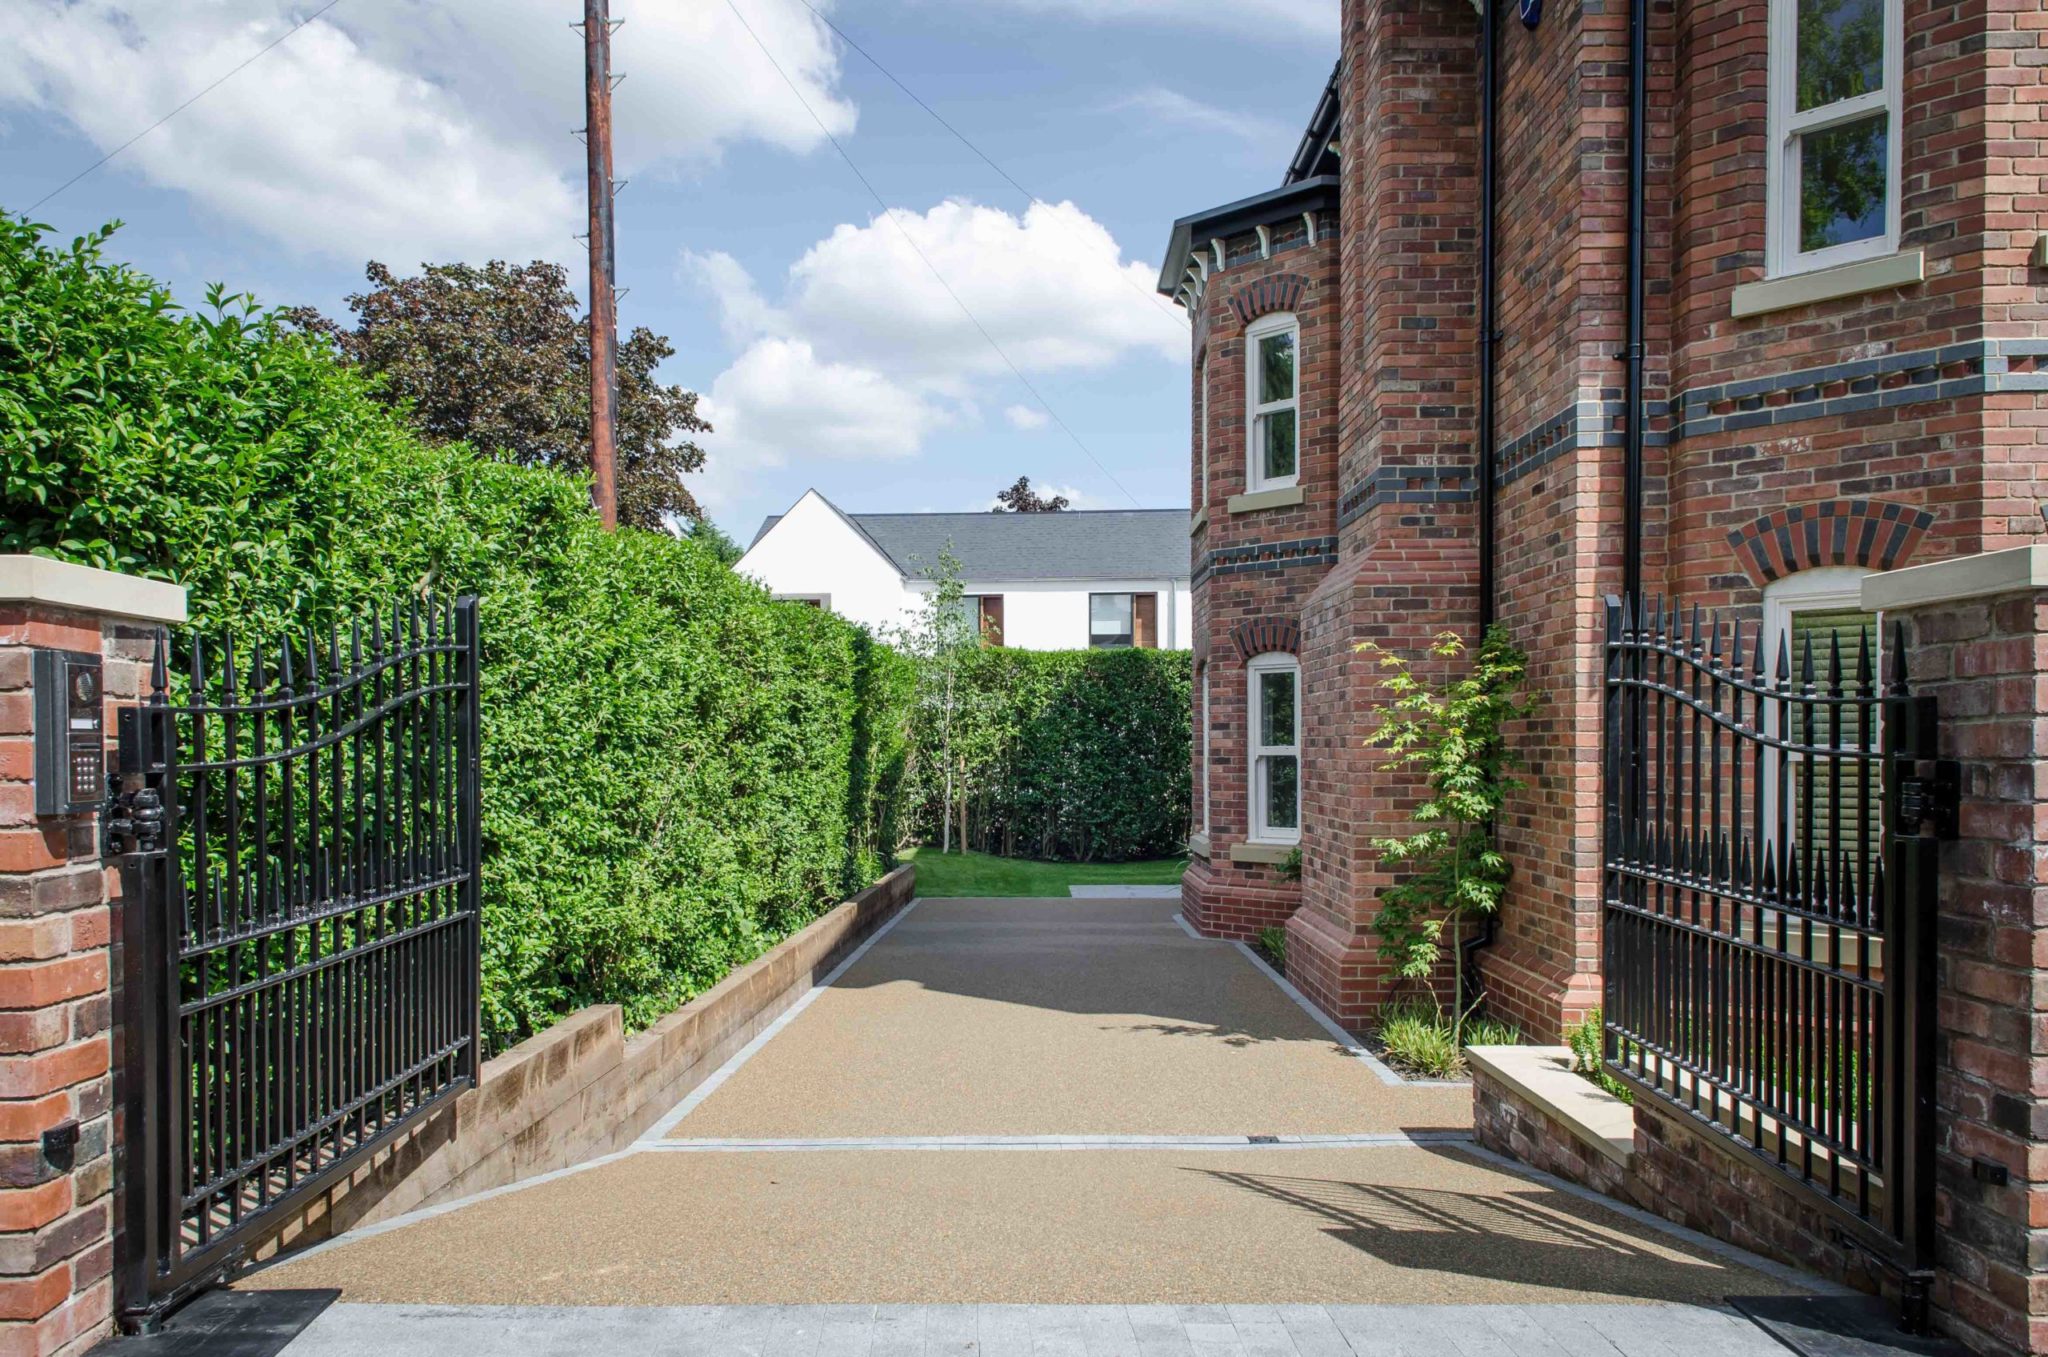 a gated driveway leading to a brick building.